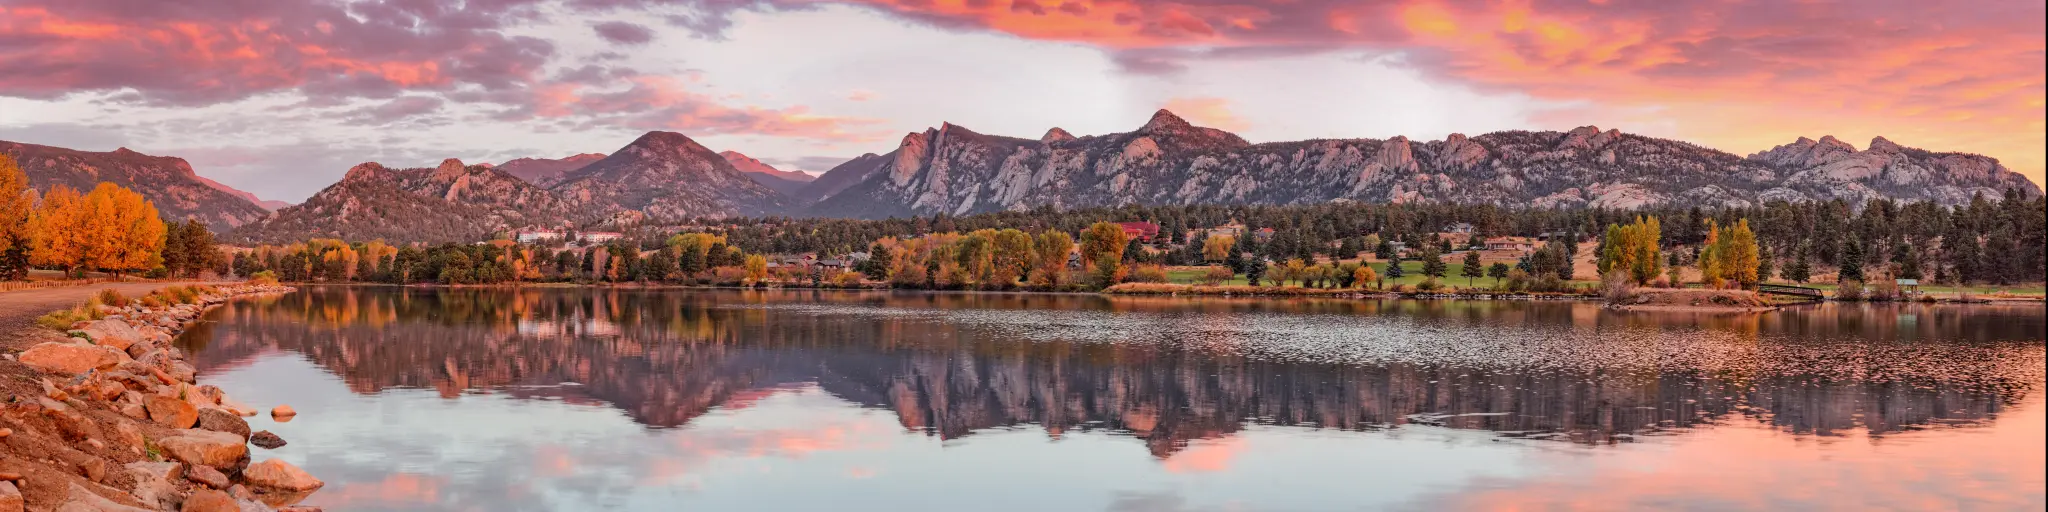 Rocky Mountain National Park, Colorado with a fiery Sunrise over Estes Park, with a lake in the foreground and trees in autumn colour and mountains in the background on the horizon. 